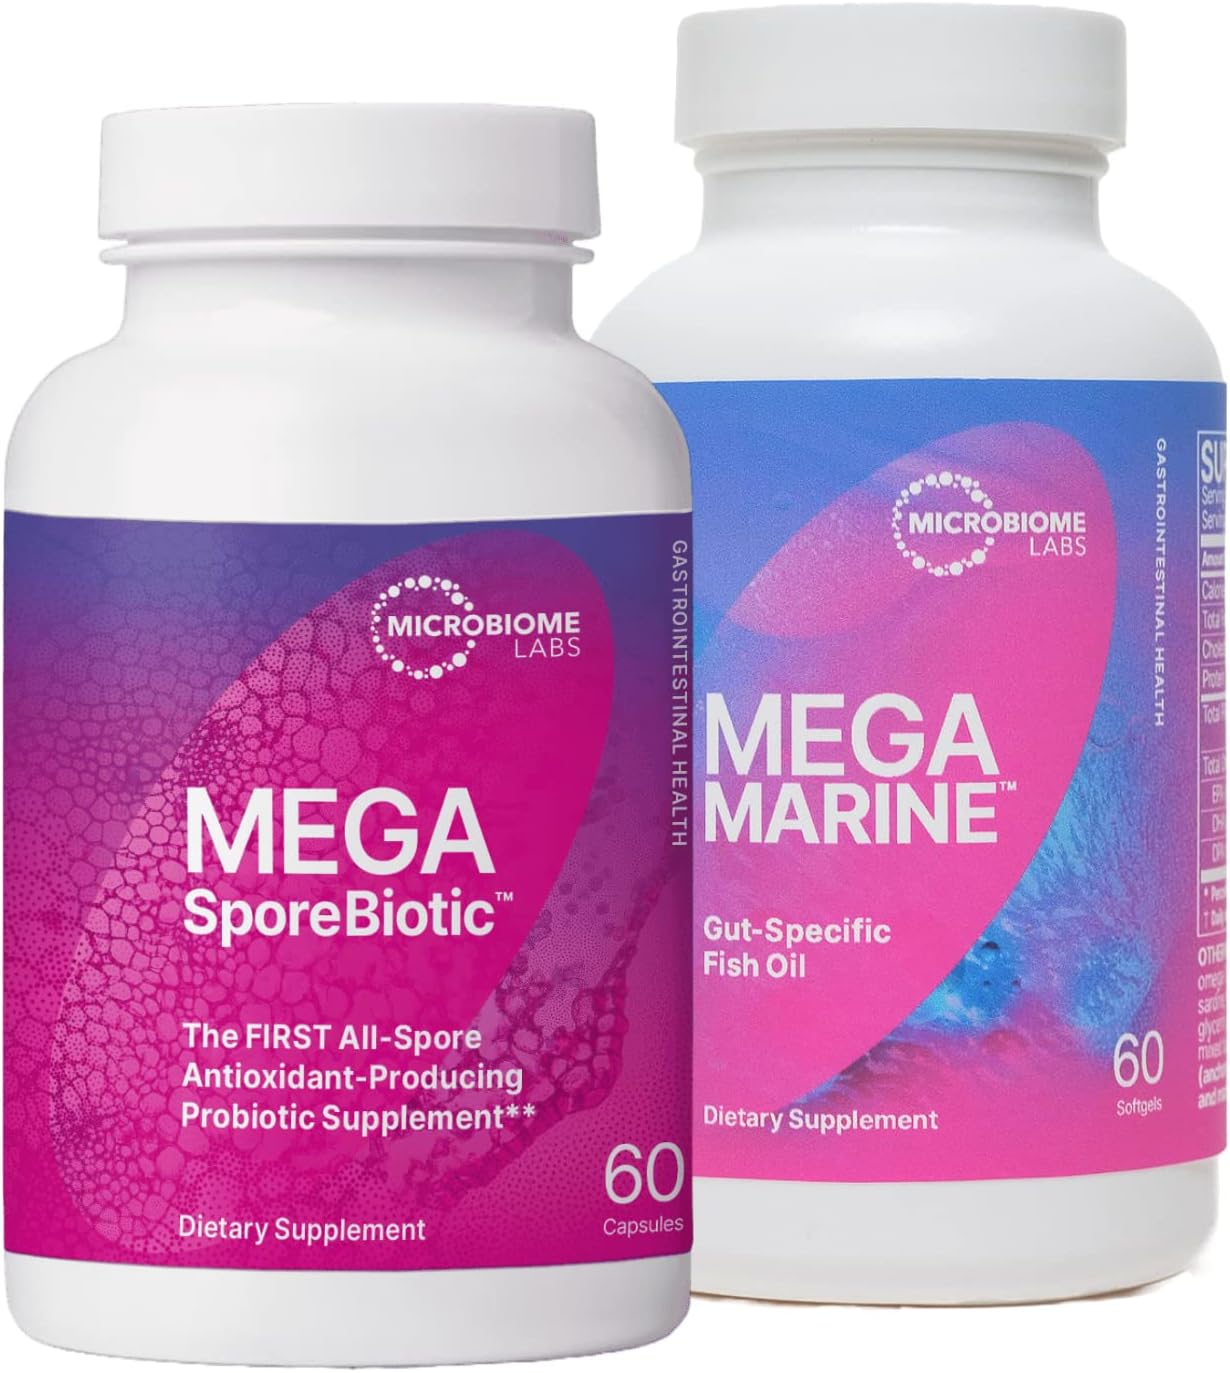 Microbiome Labs MegaSporeBiotic Spore-Based Probiotics (60 Capsules) + MegaMarine Fish Oil Supplement - Omega 3 Pills with EPA DHA DPA Ratio to Support Immune  Gut Health (60 Softgels) - 2 Products